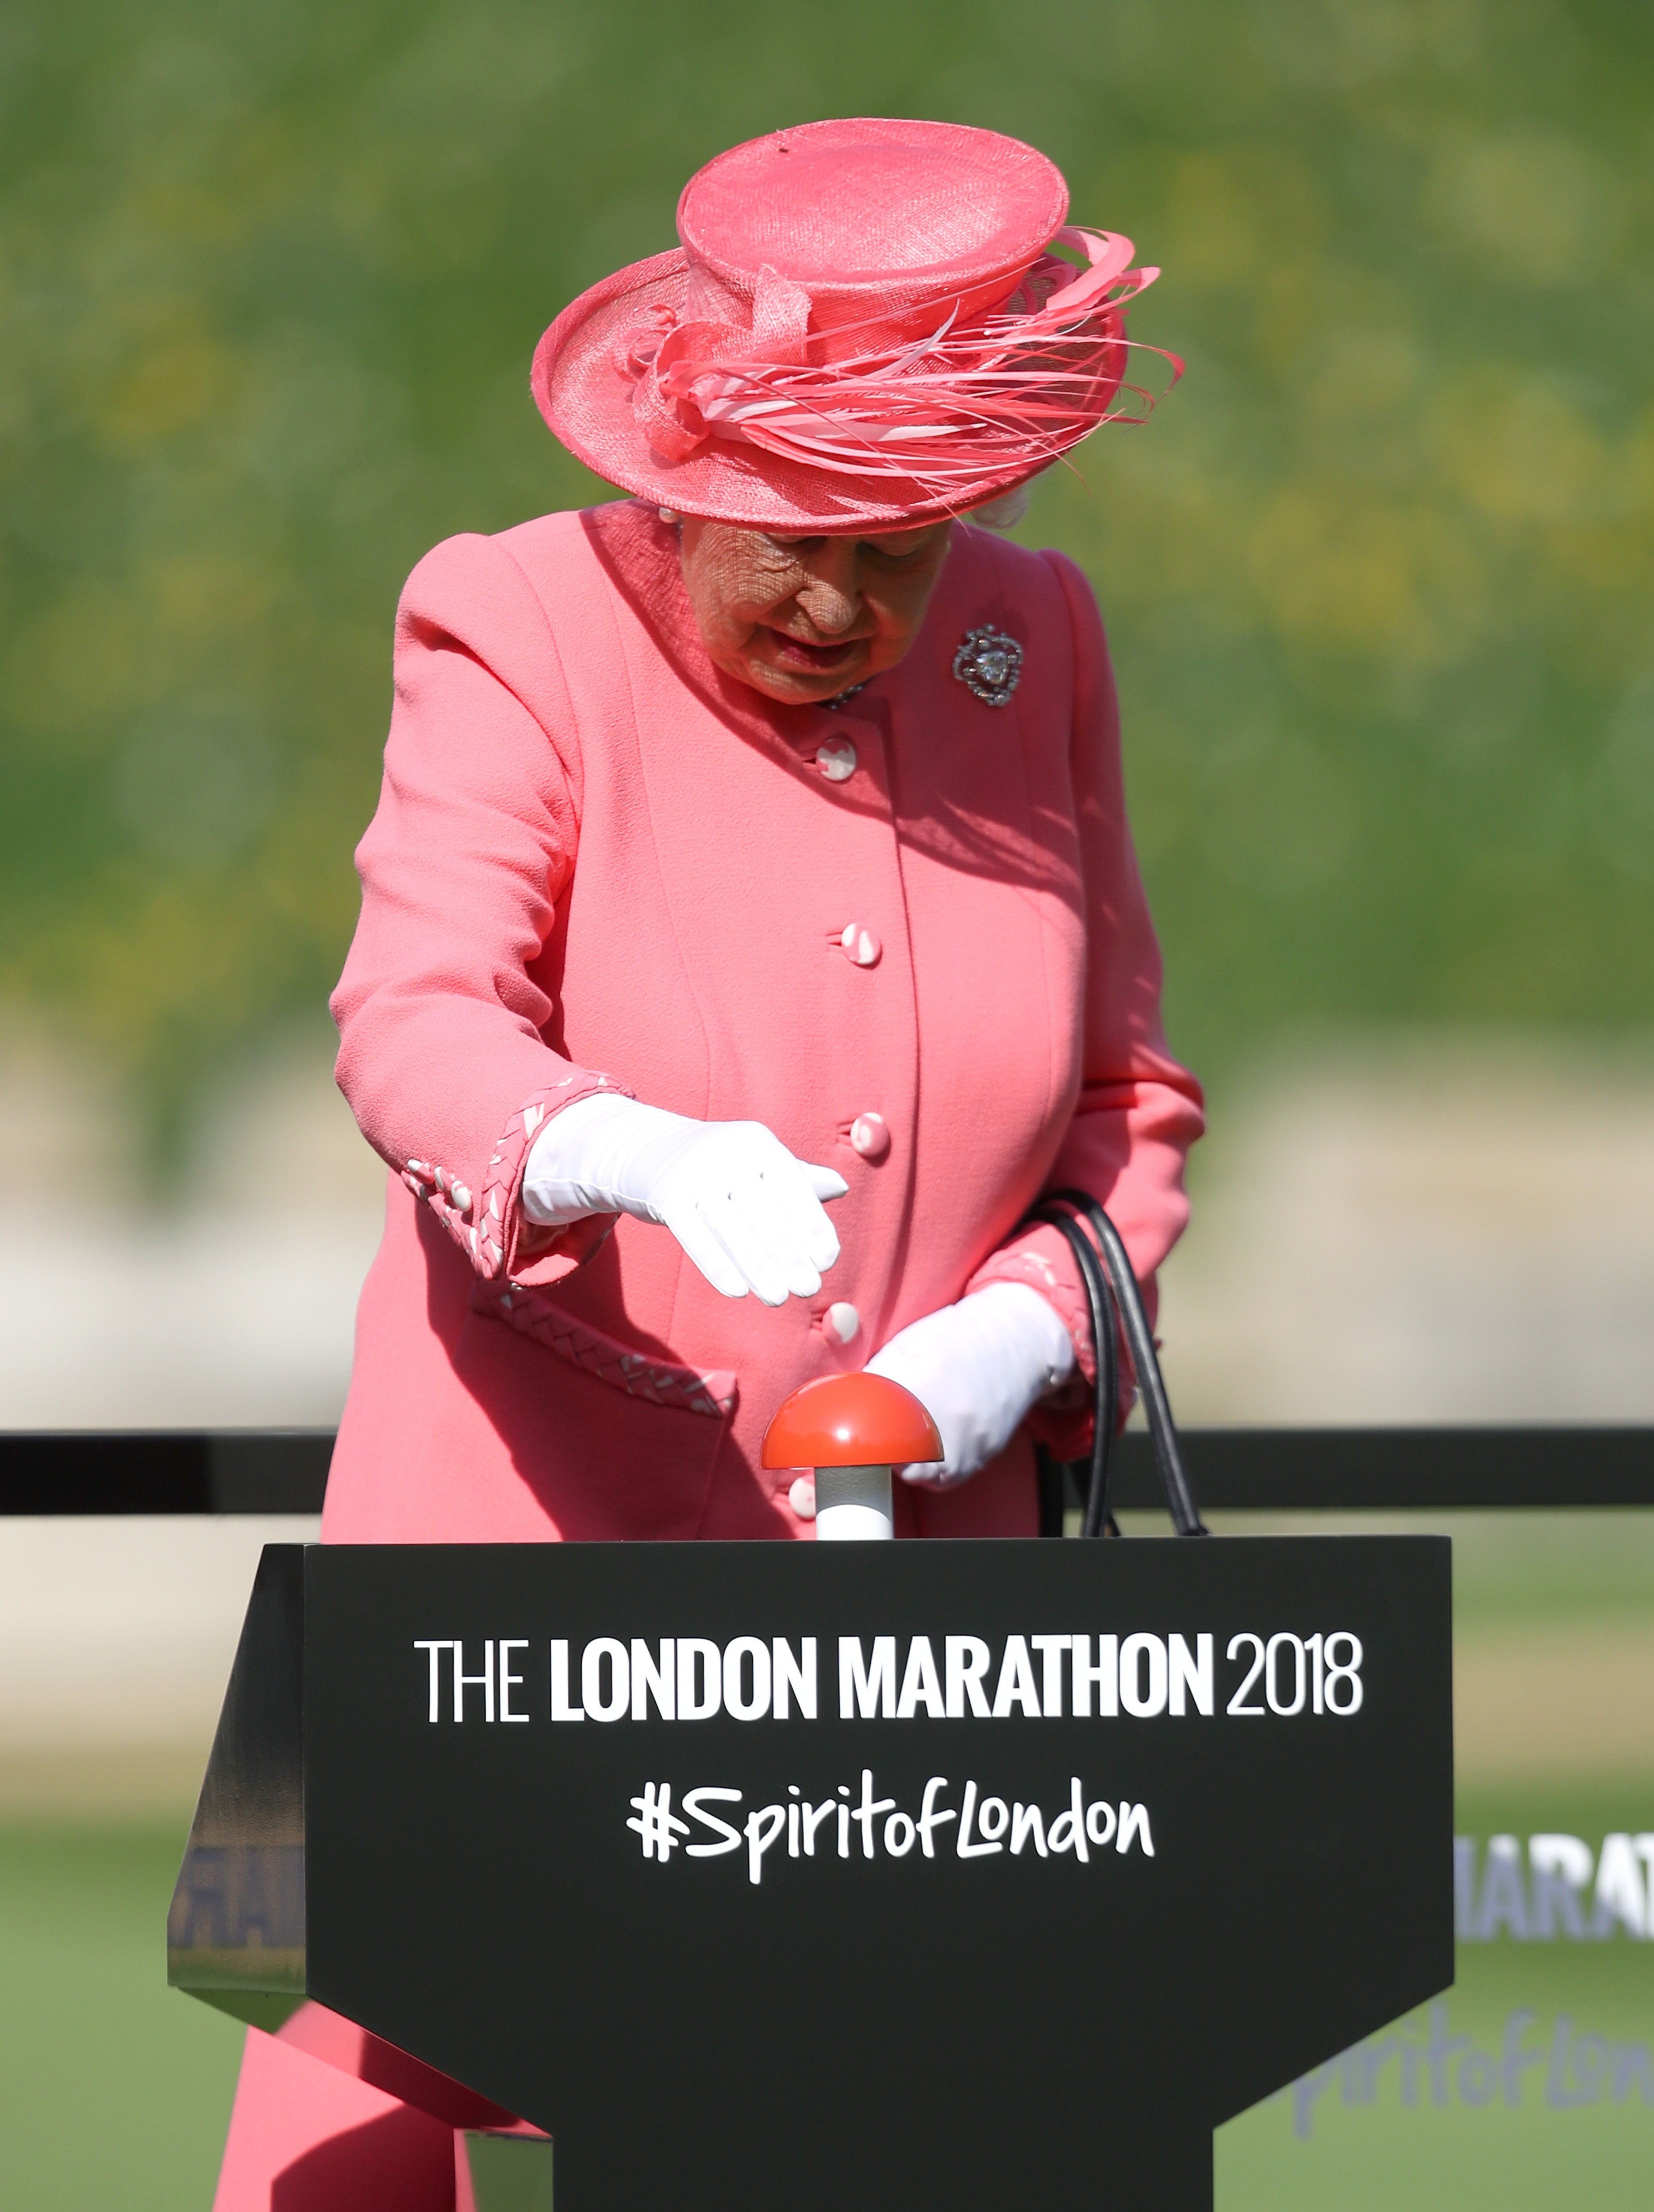 The Queen, at Windsor Castle, presses a button to start the 2018 London Marathon (Chris Jackson/PA).